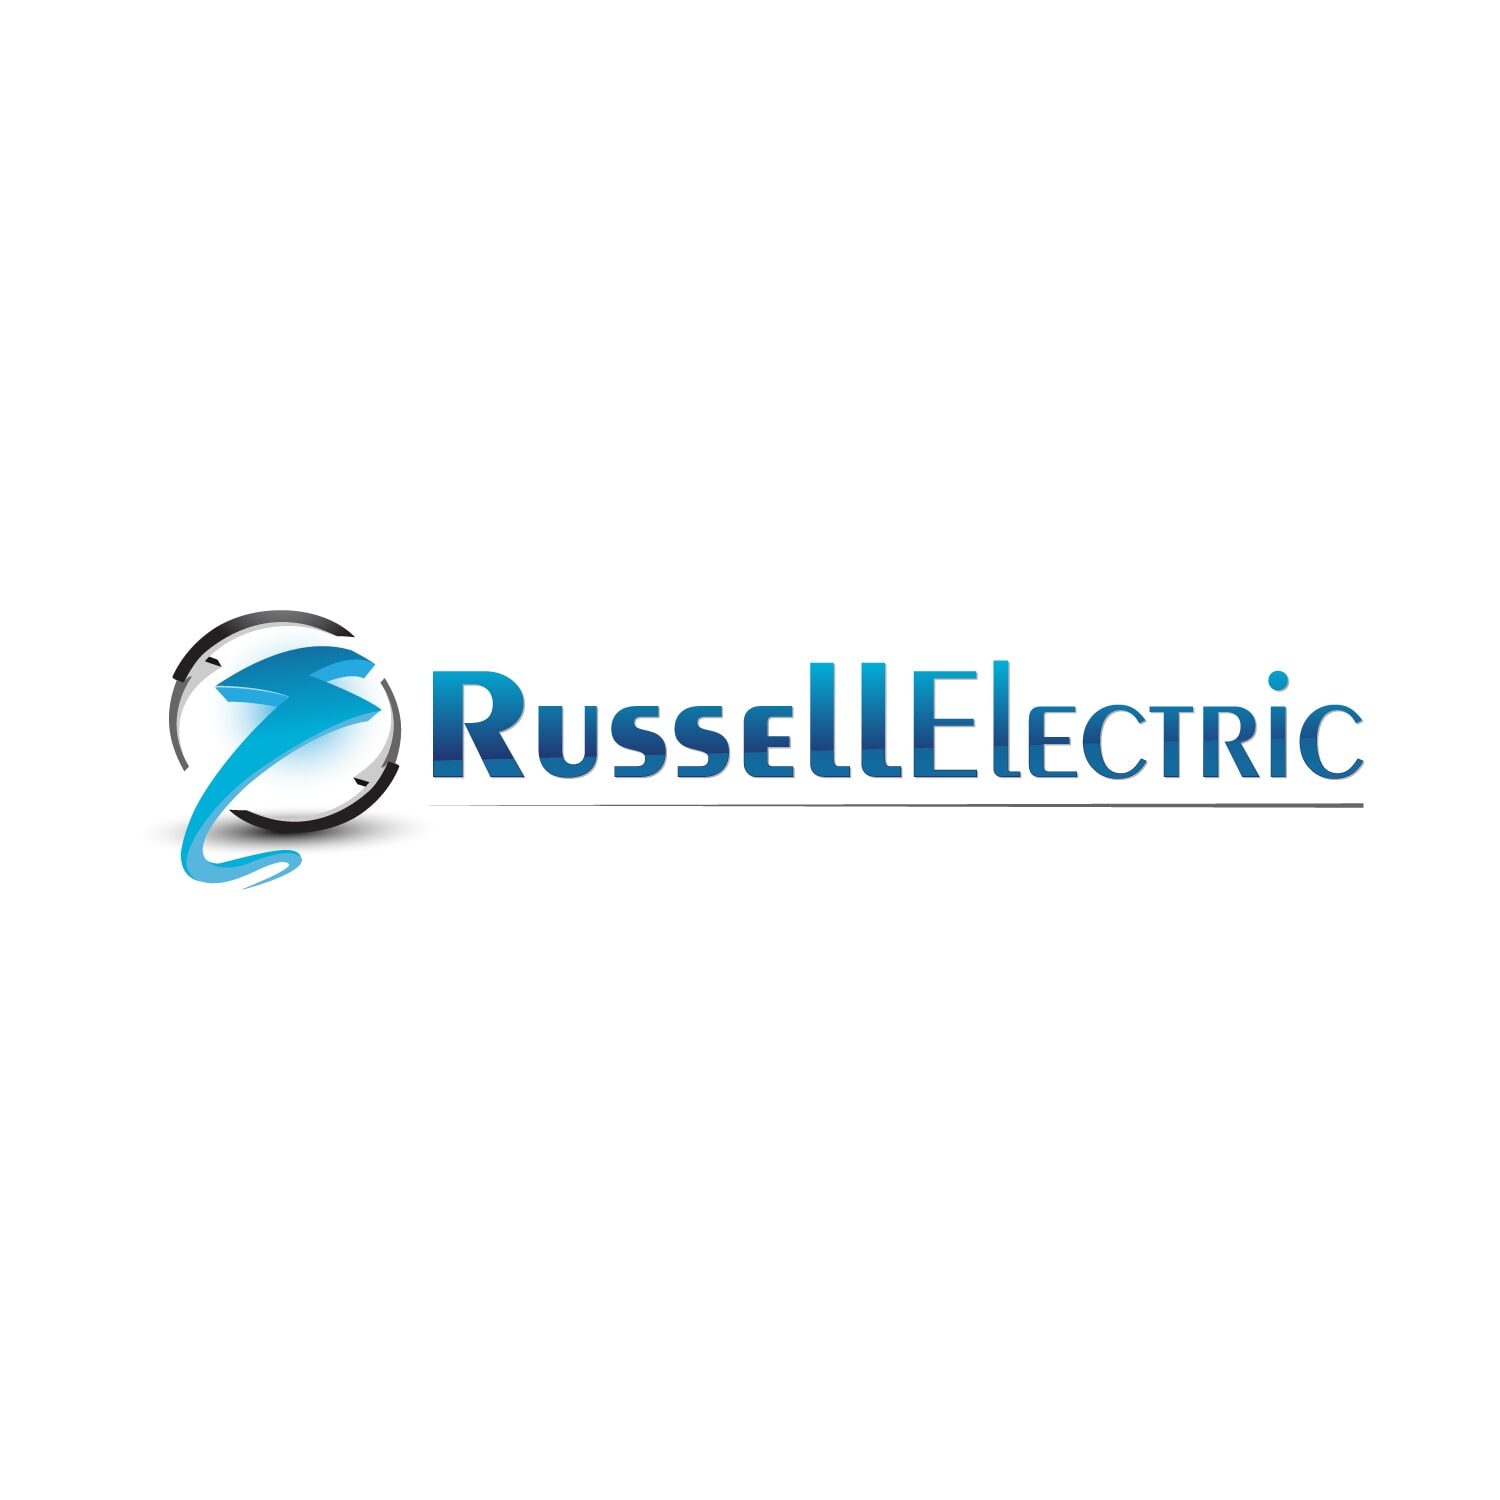 Russell Electric Inc.